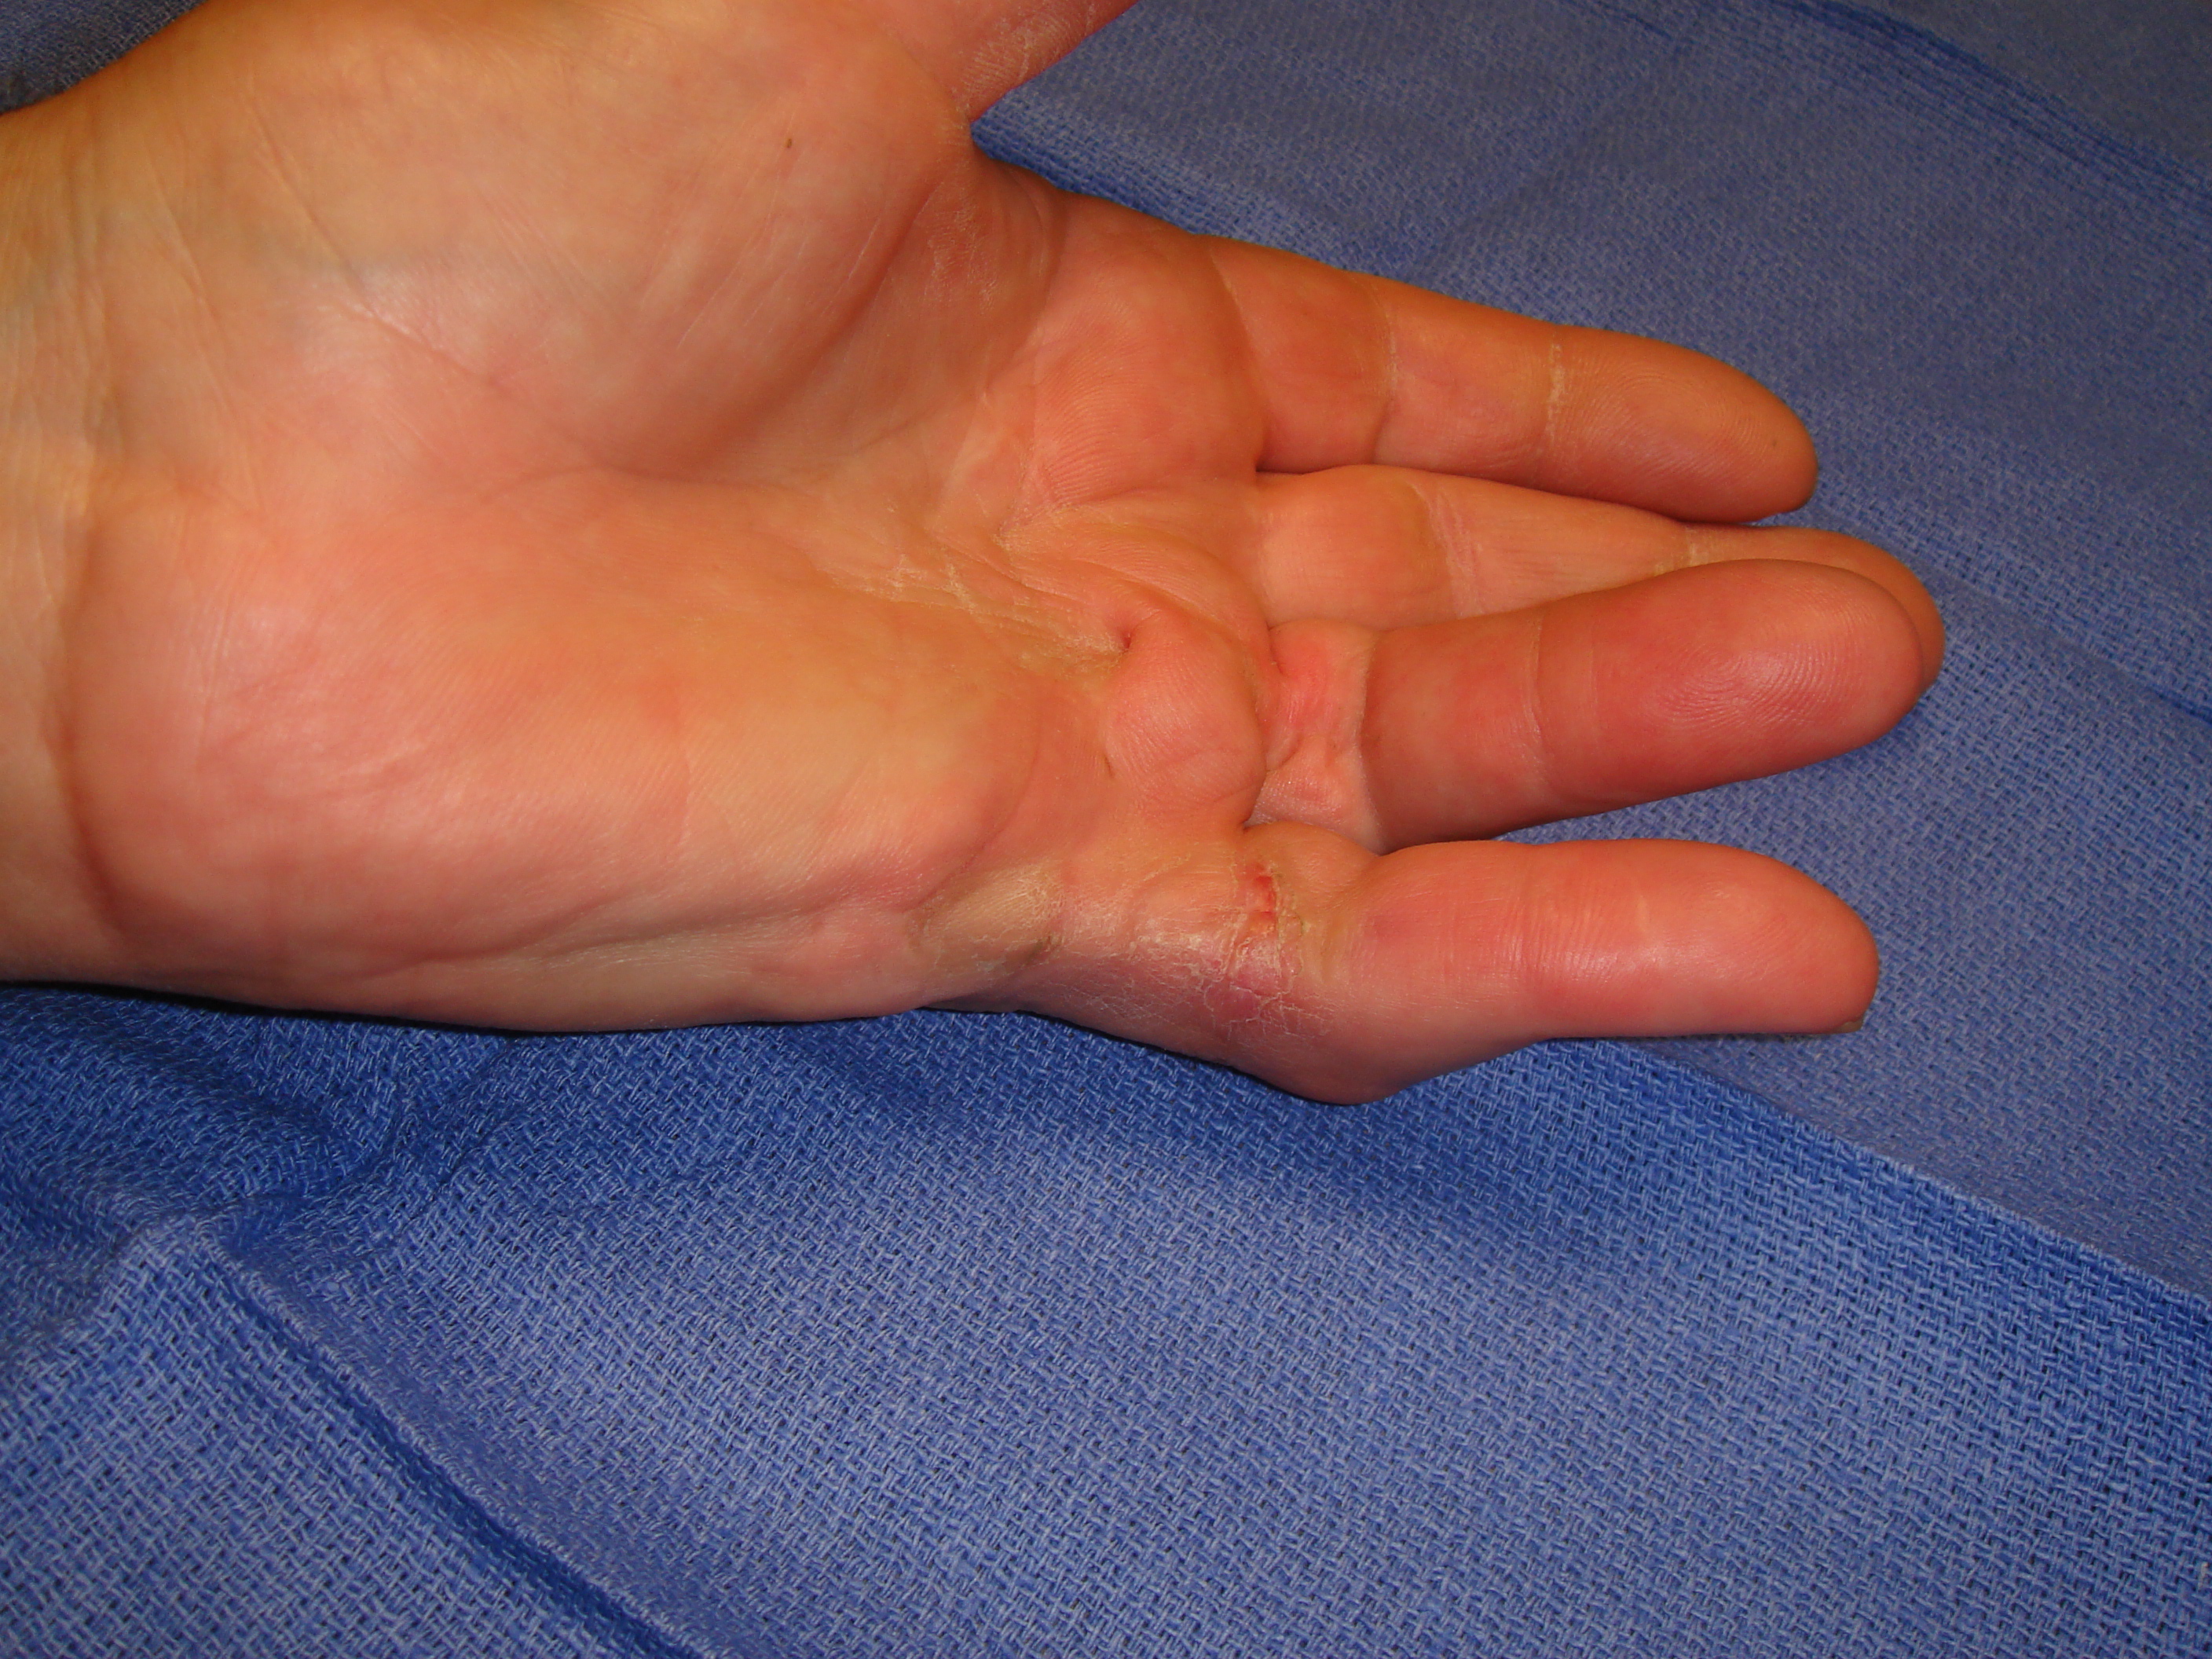 Figure 6h: Two months post-manipulation, the skin tear is healed. He has useful but incomplete MP and PIP motion after enzyme correction of the contractures. Limited little finger distal interphalangeal (DIP) joint flexion from osteoarthritis is evident with active grip.